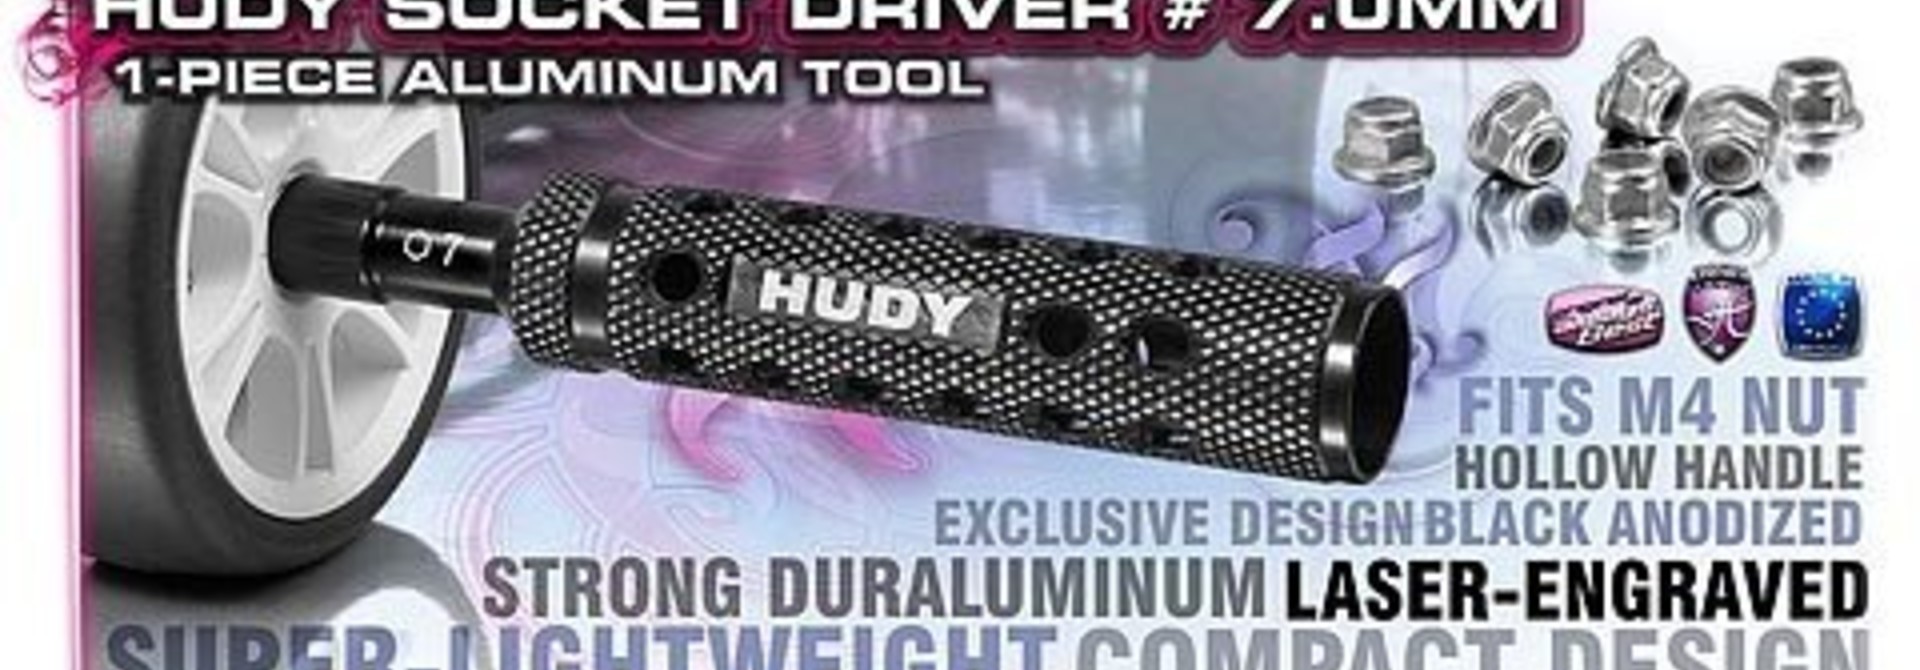 Limited Edition - Alu 1-Piece Socket Driver 7.0 mm. H170007